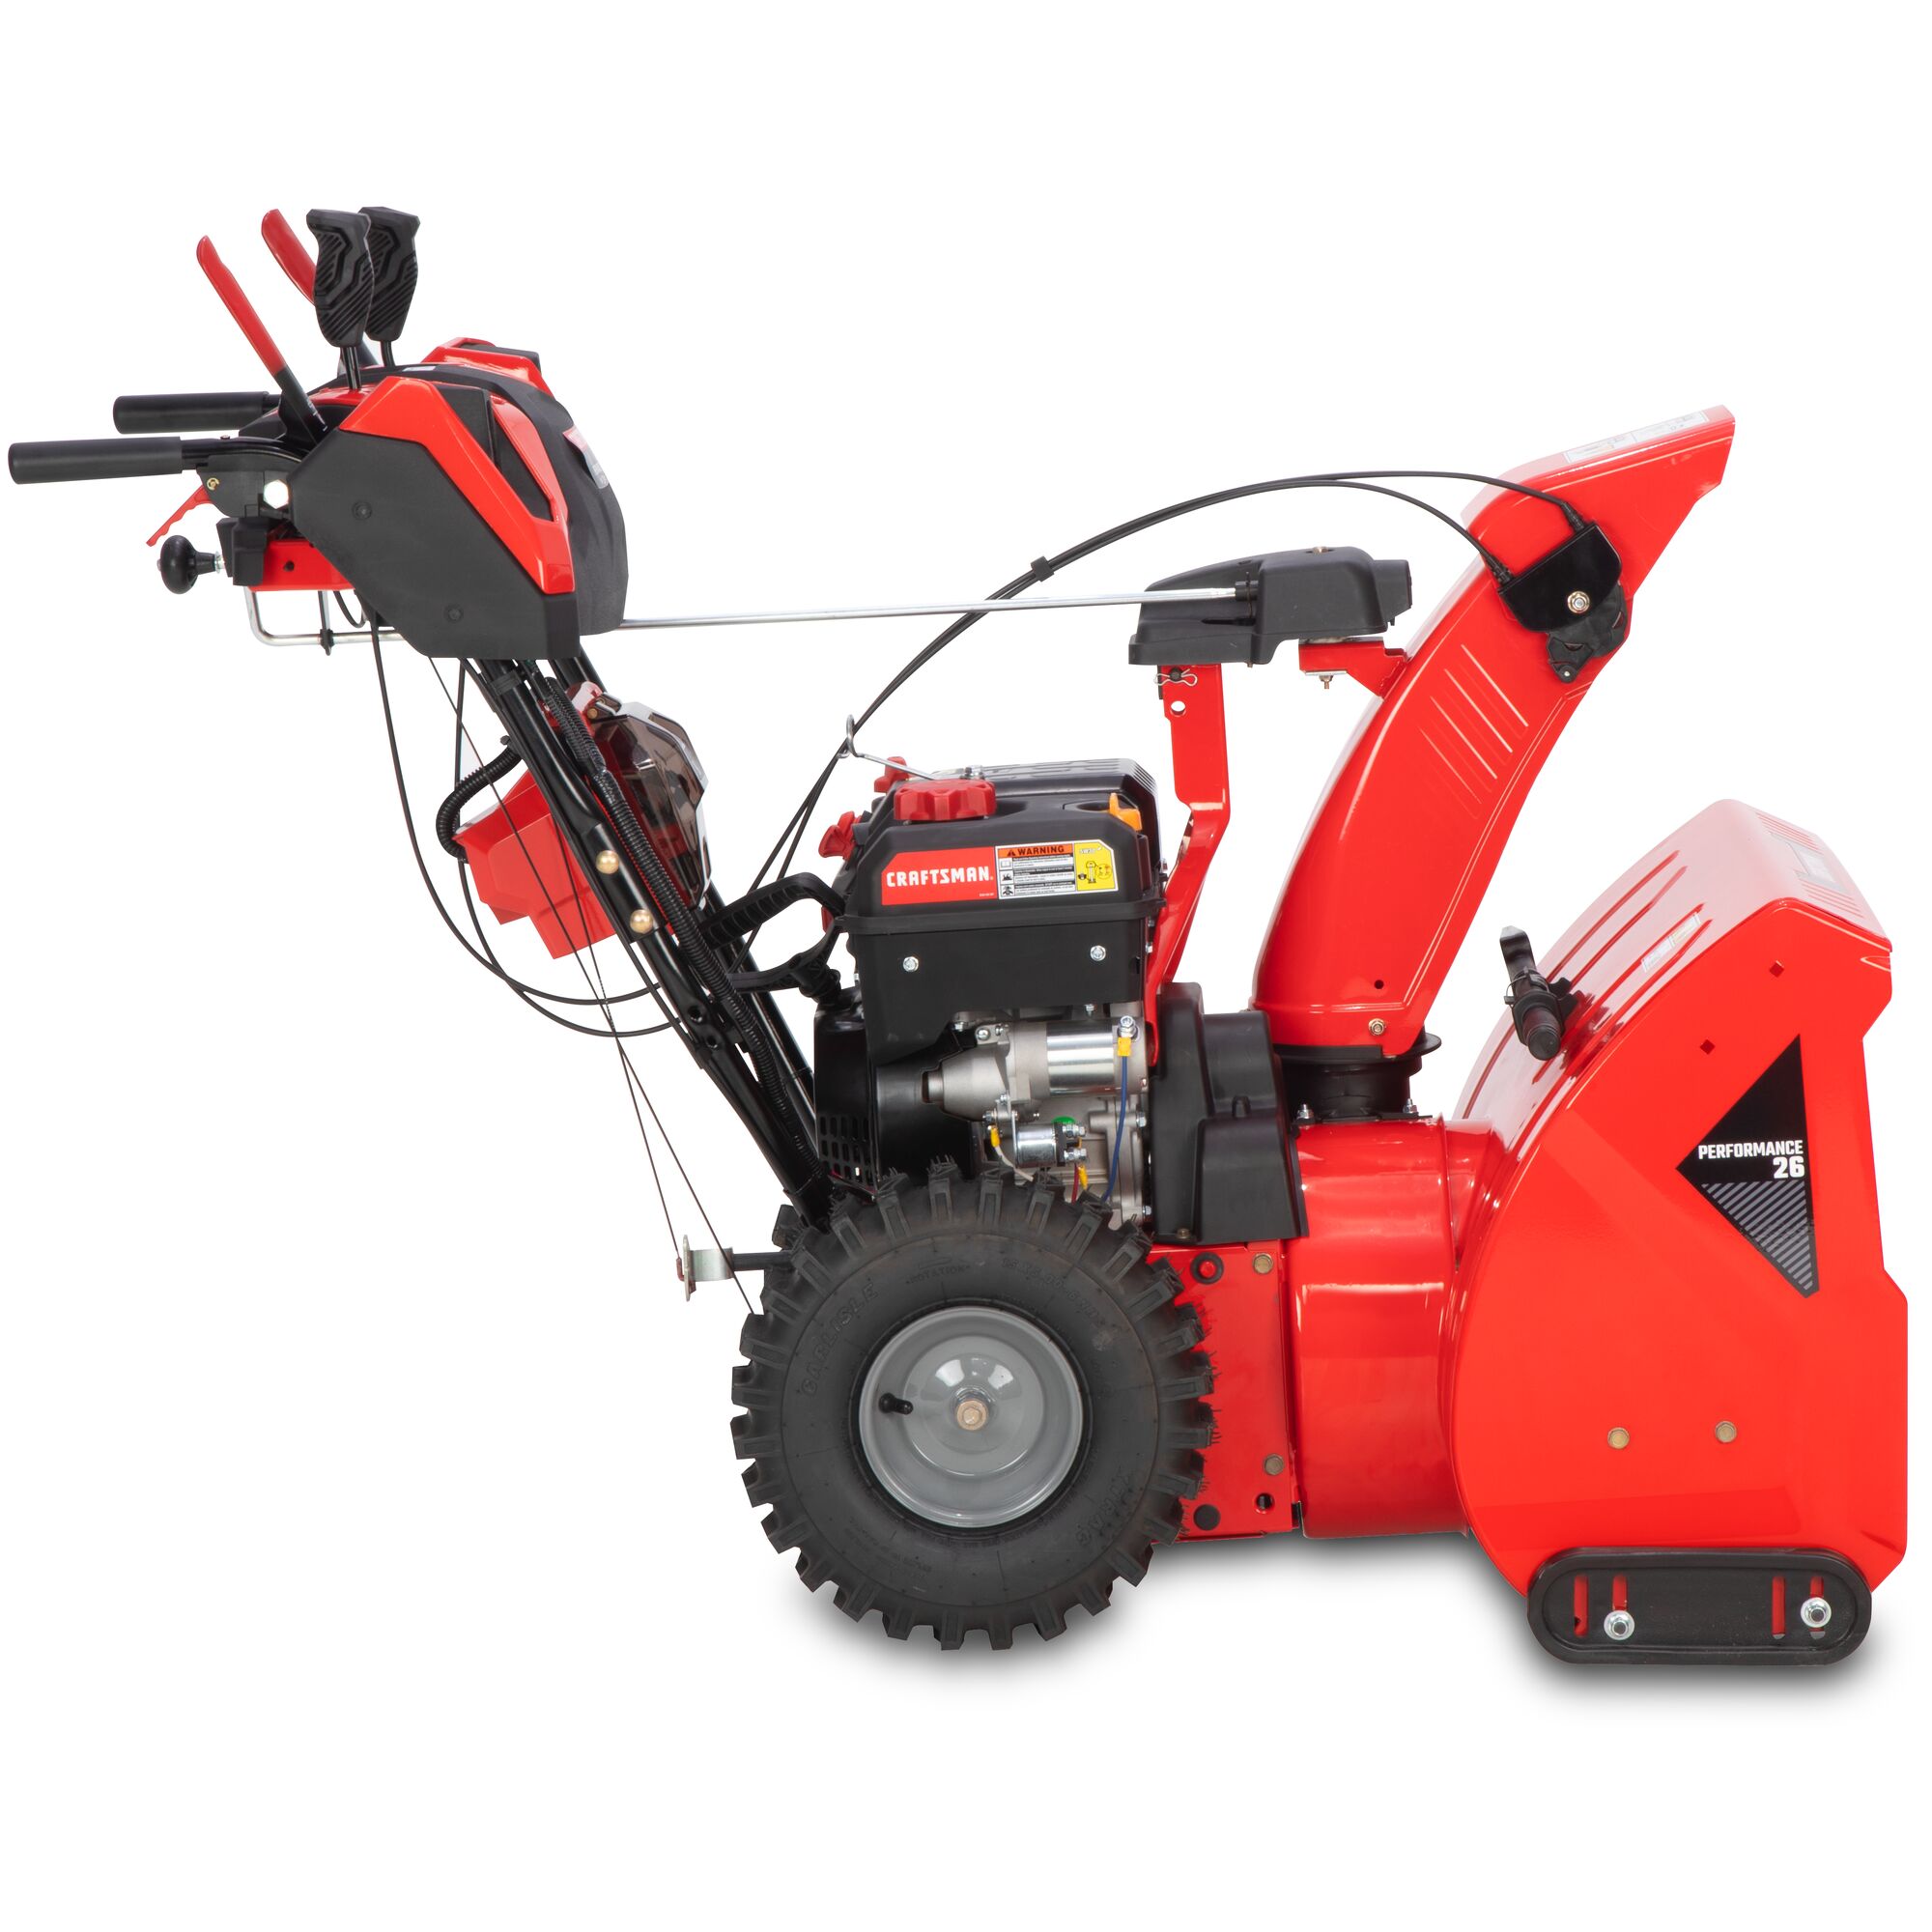 CRAFTSMAN Performance 26 V20* Start 26-in 243-cc Two Stage Gas Snow Blower with V20 Battery Start on white background